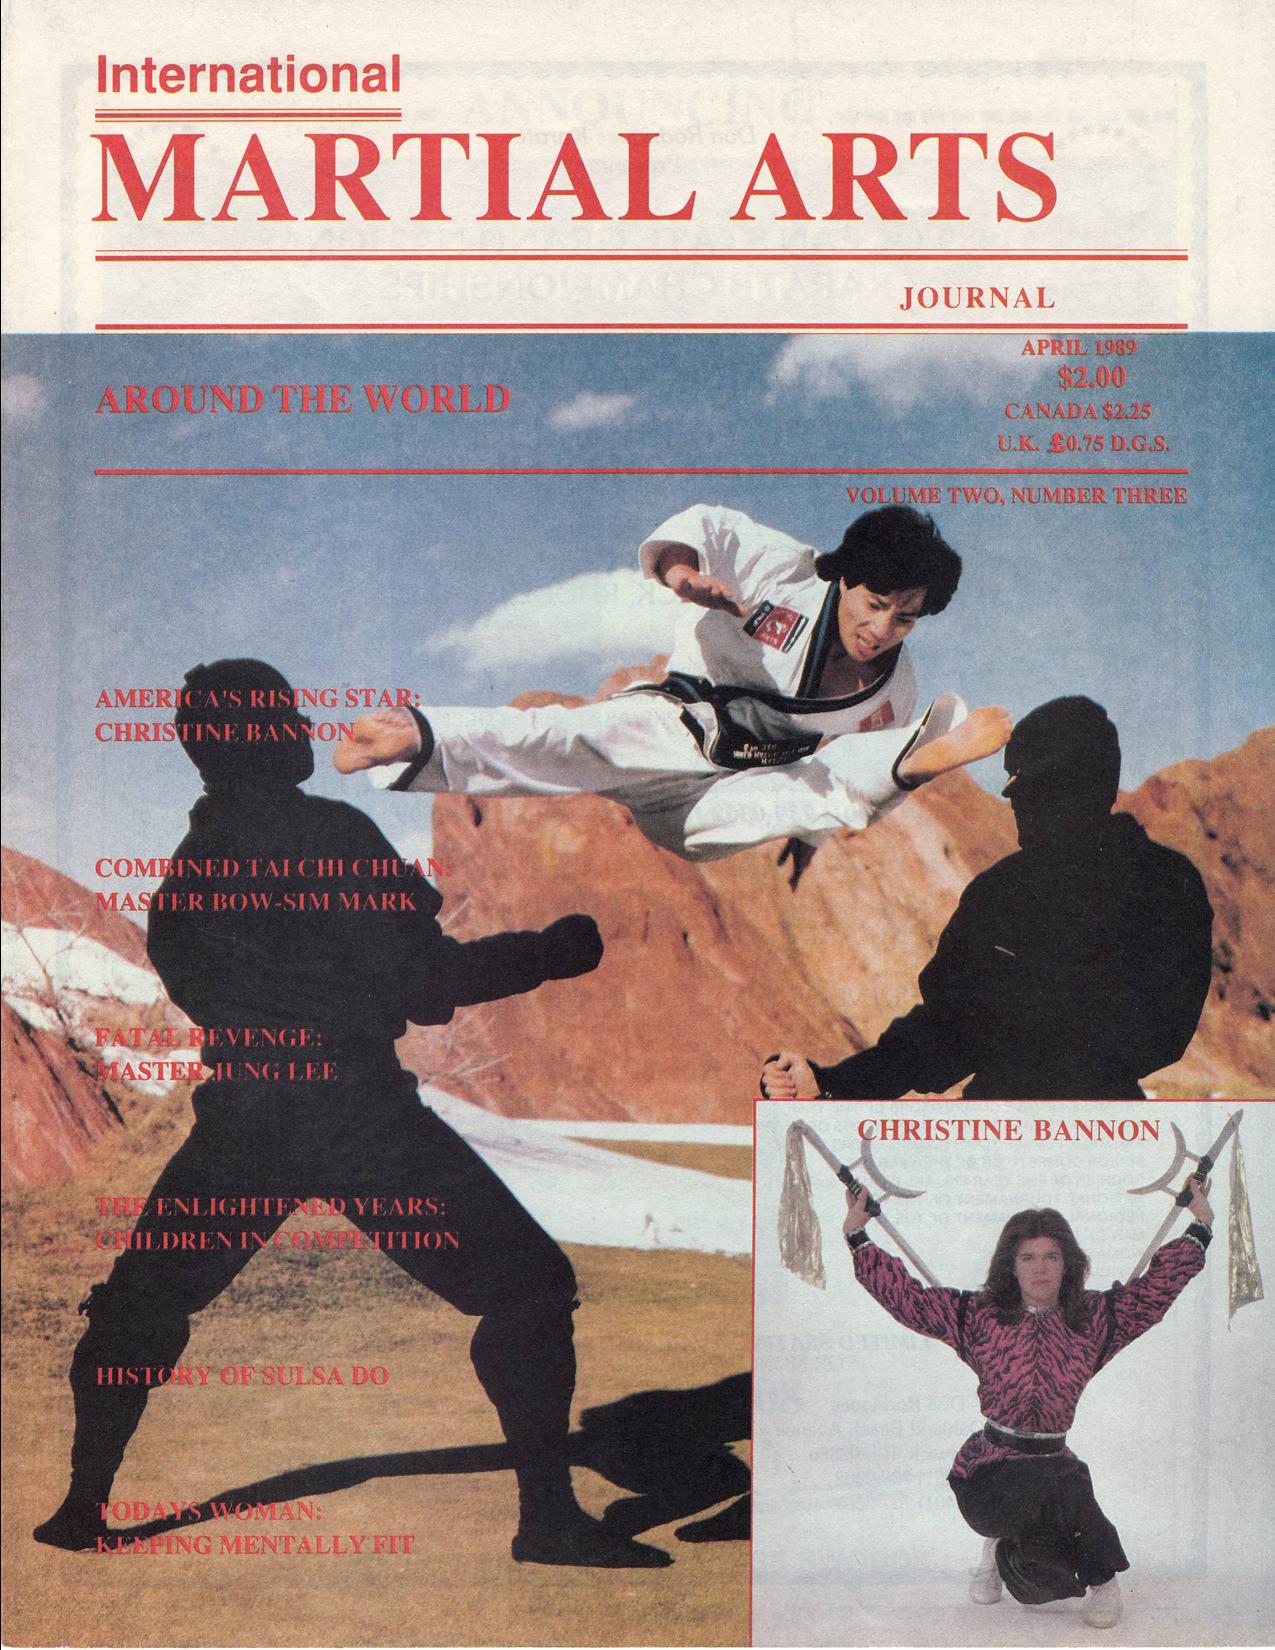 Julian Lee leaps into action (performing scissor kick) - cover story of Intl Martial Arts Journal